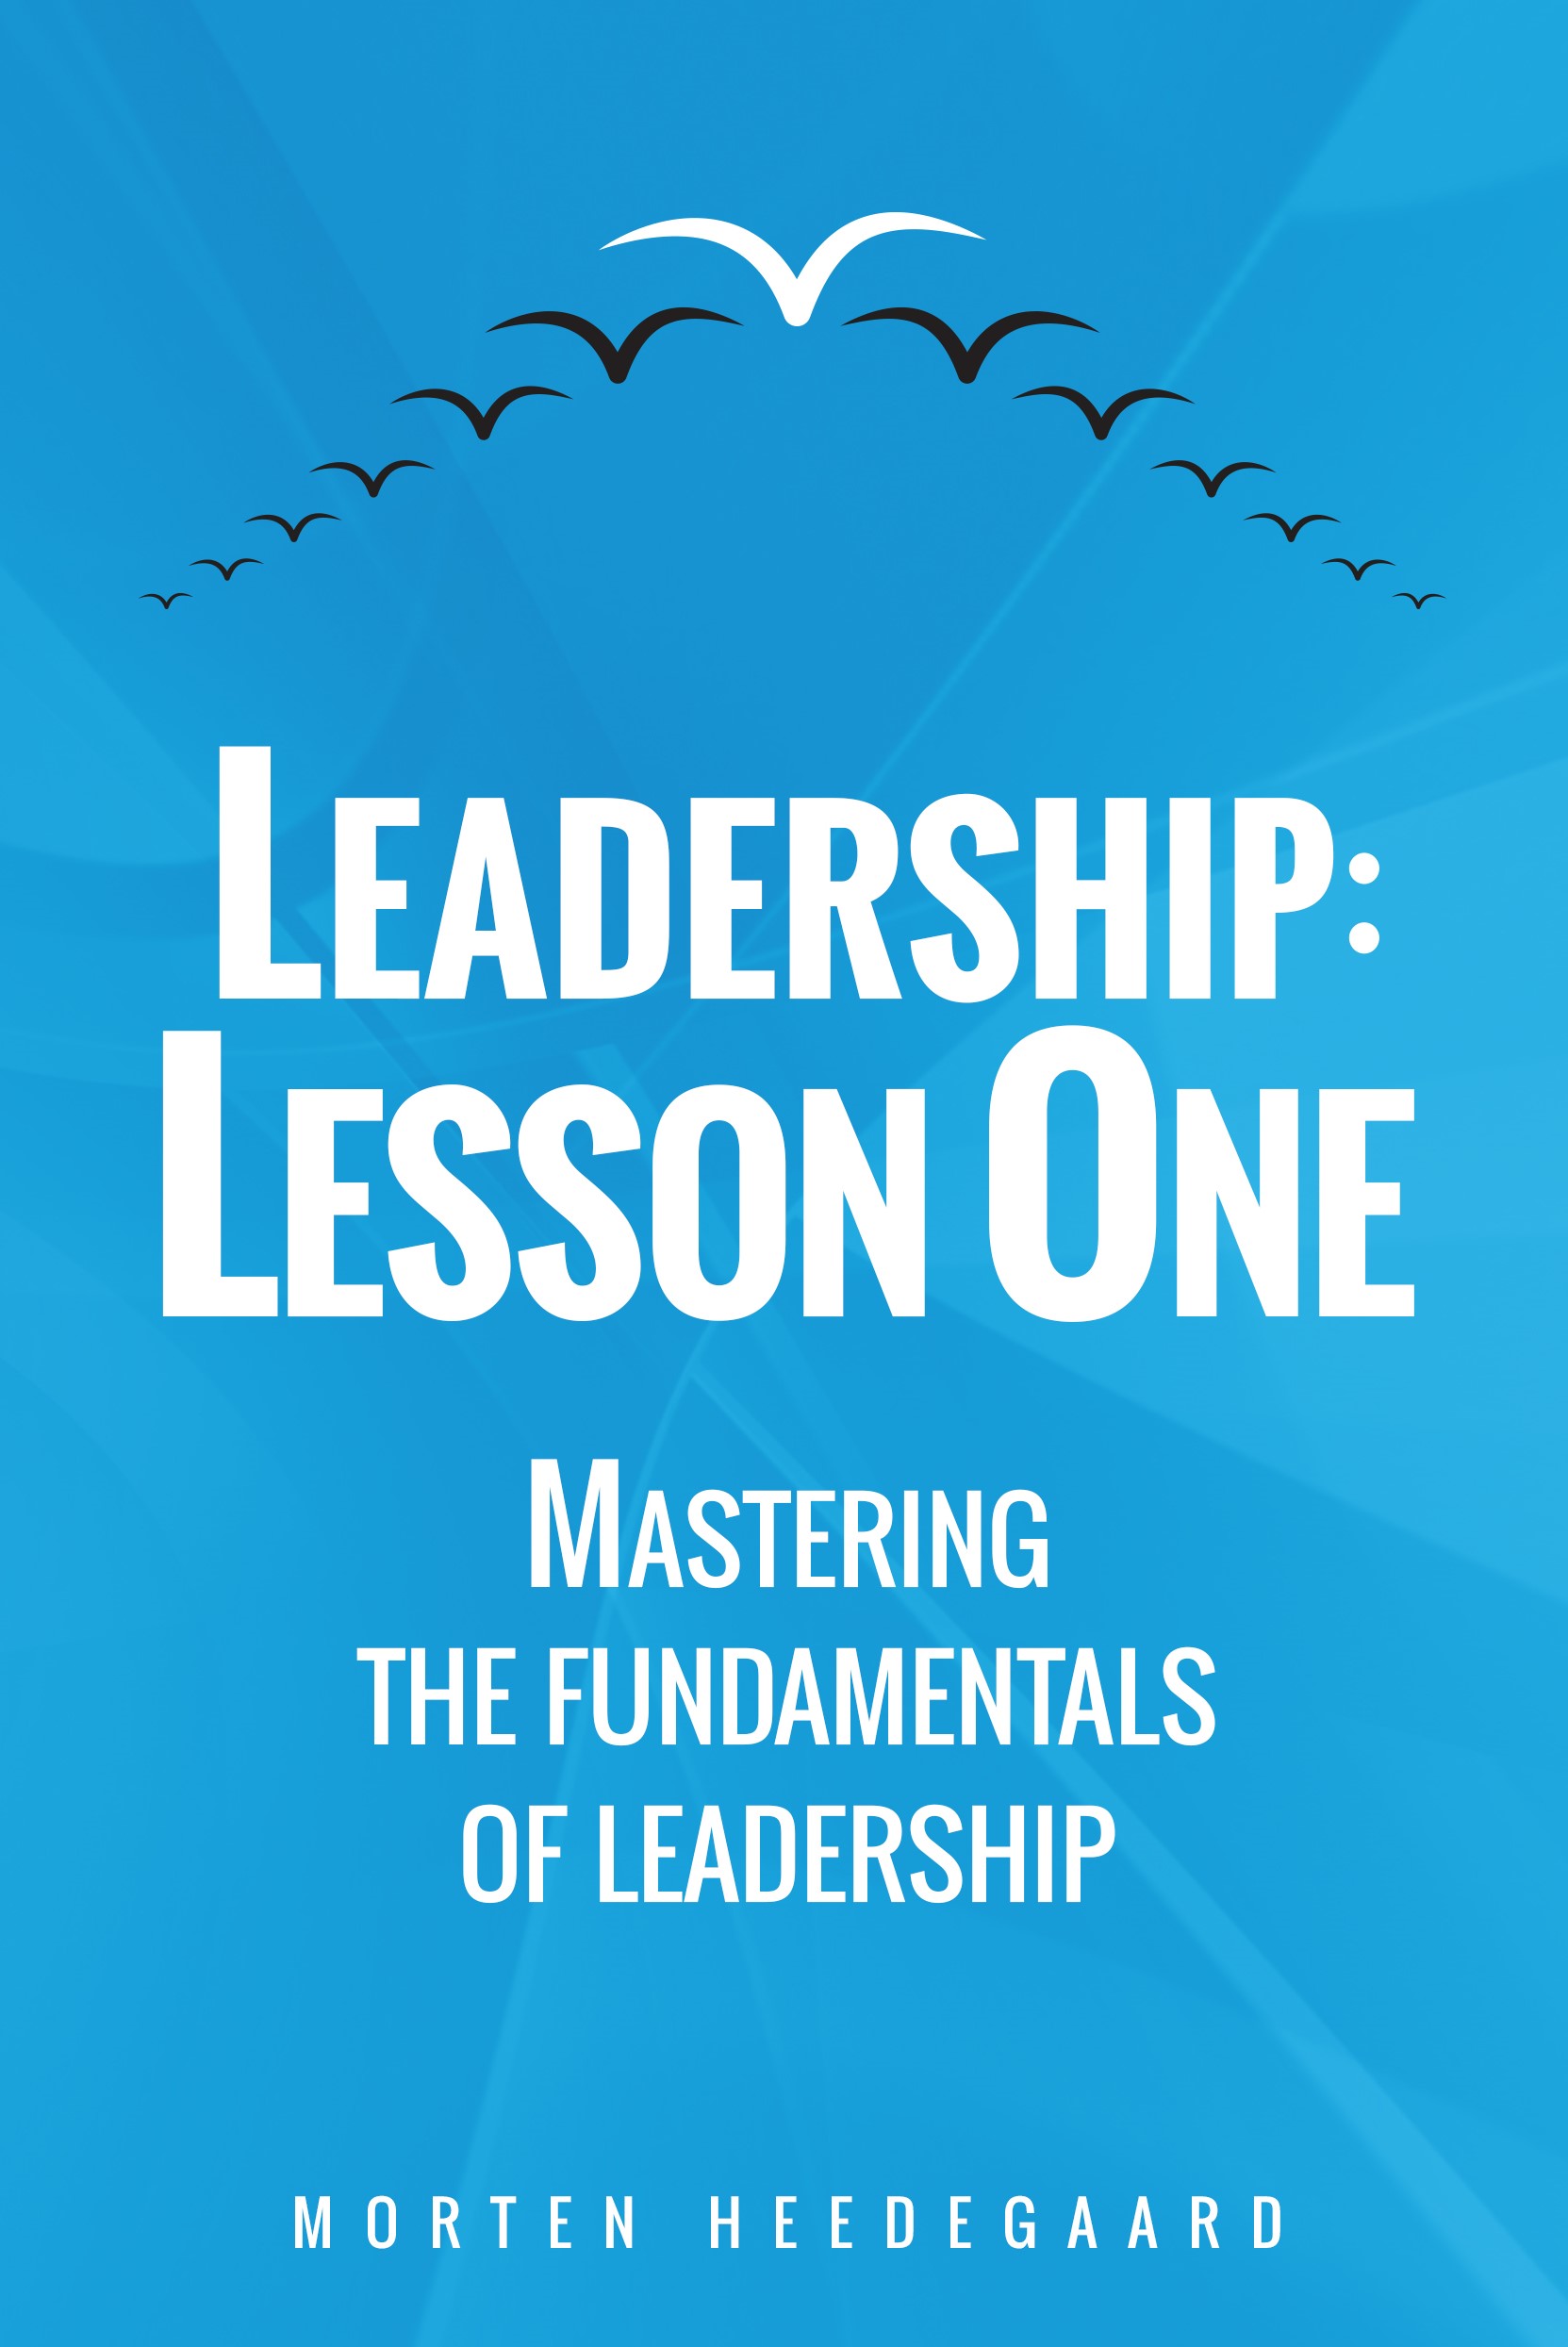 Leadership Lesson One Mastering the Fundamentals of Leadership